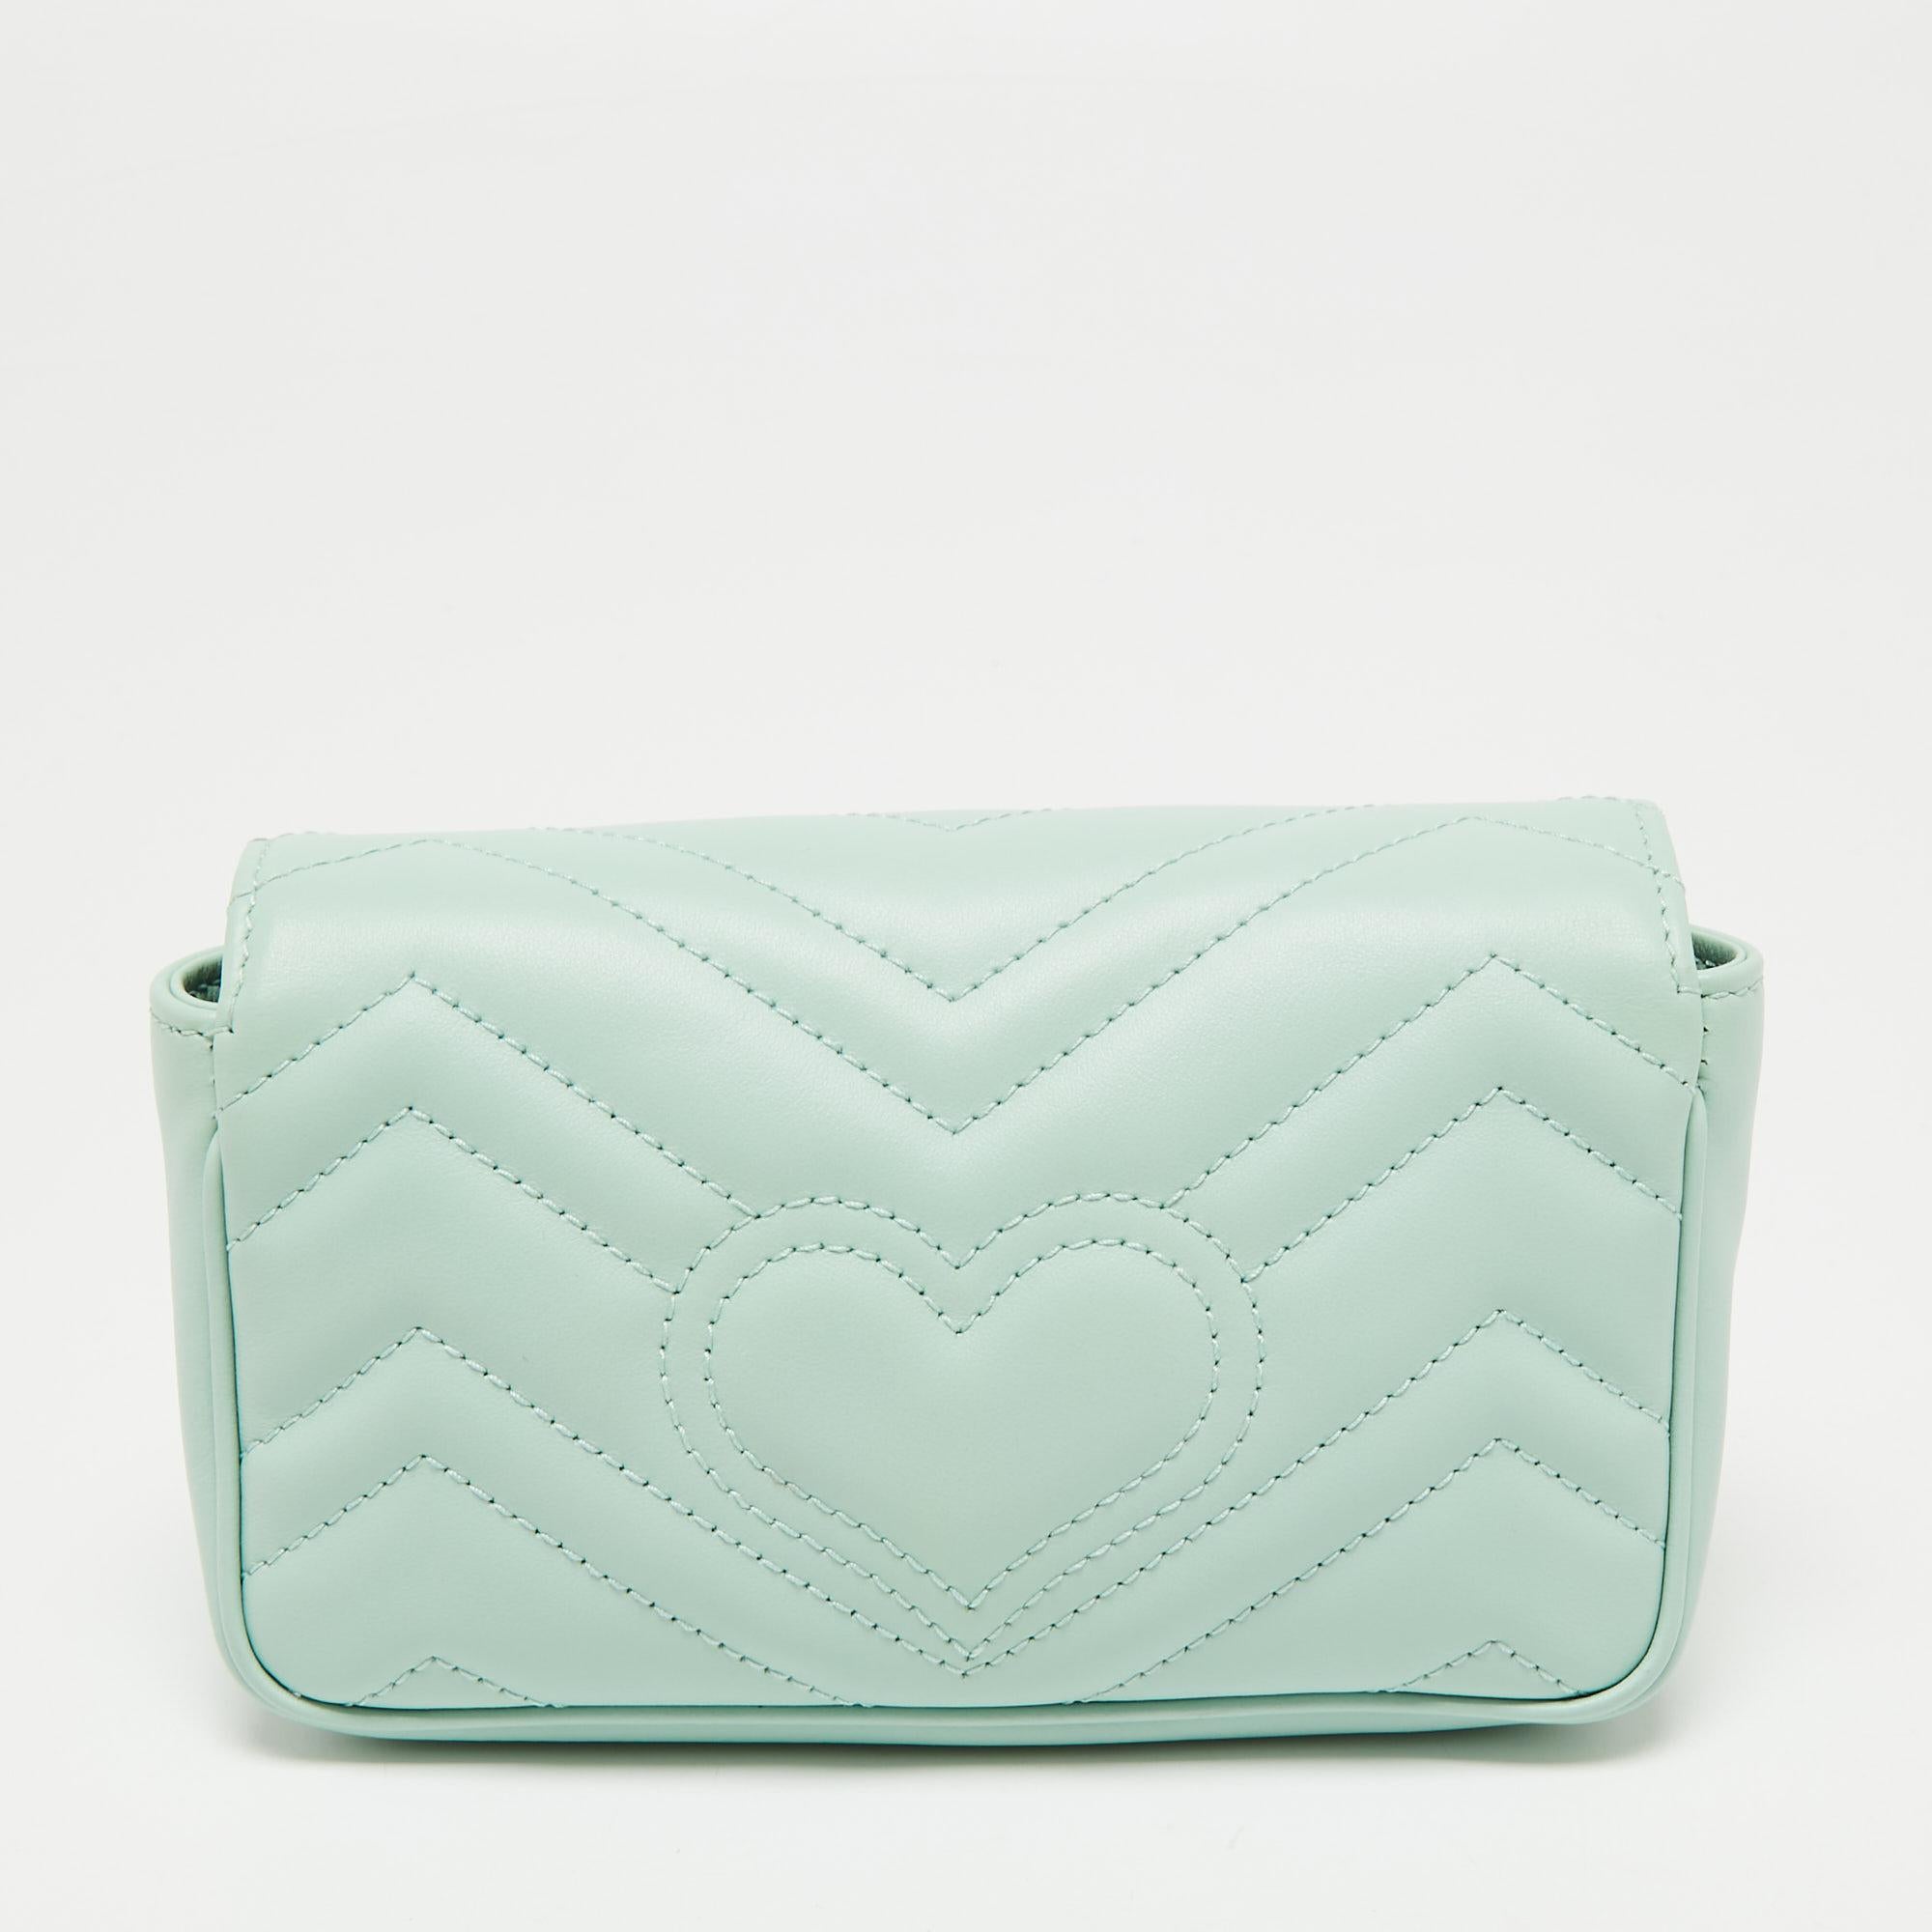 This Gucci GG Marmont shoulder bag is a timeless piece to last you season after season. This bag is made of Matelassé leather and will suit all your needs. It has a mint green shade, GG logo detailing, a long shoulder chain, and an Alcantara-lined